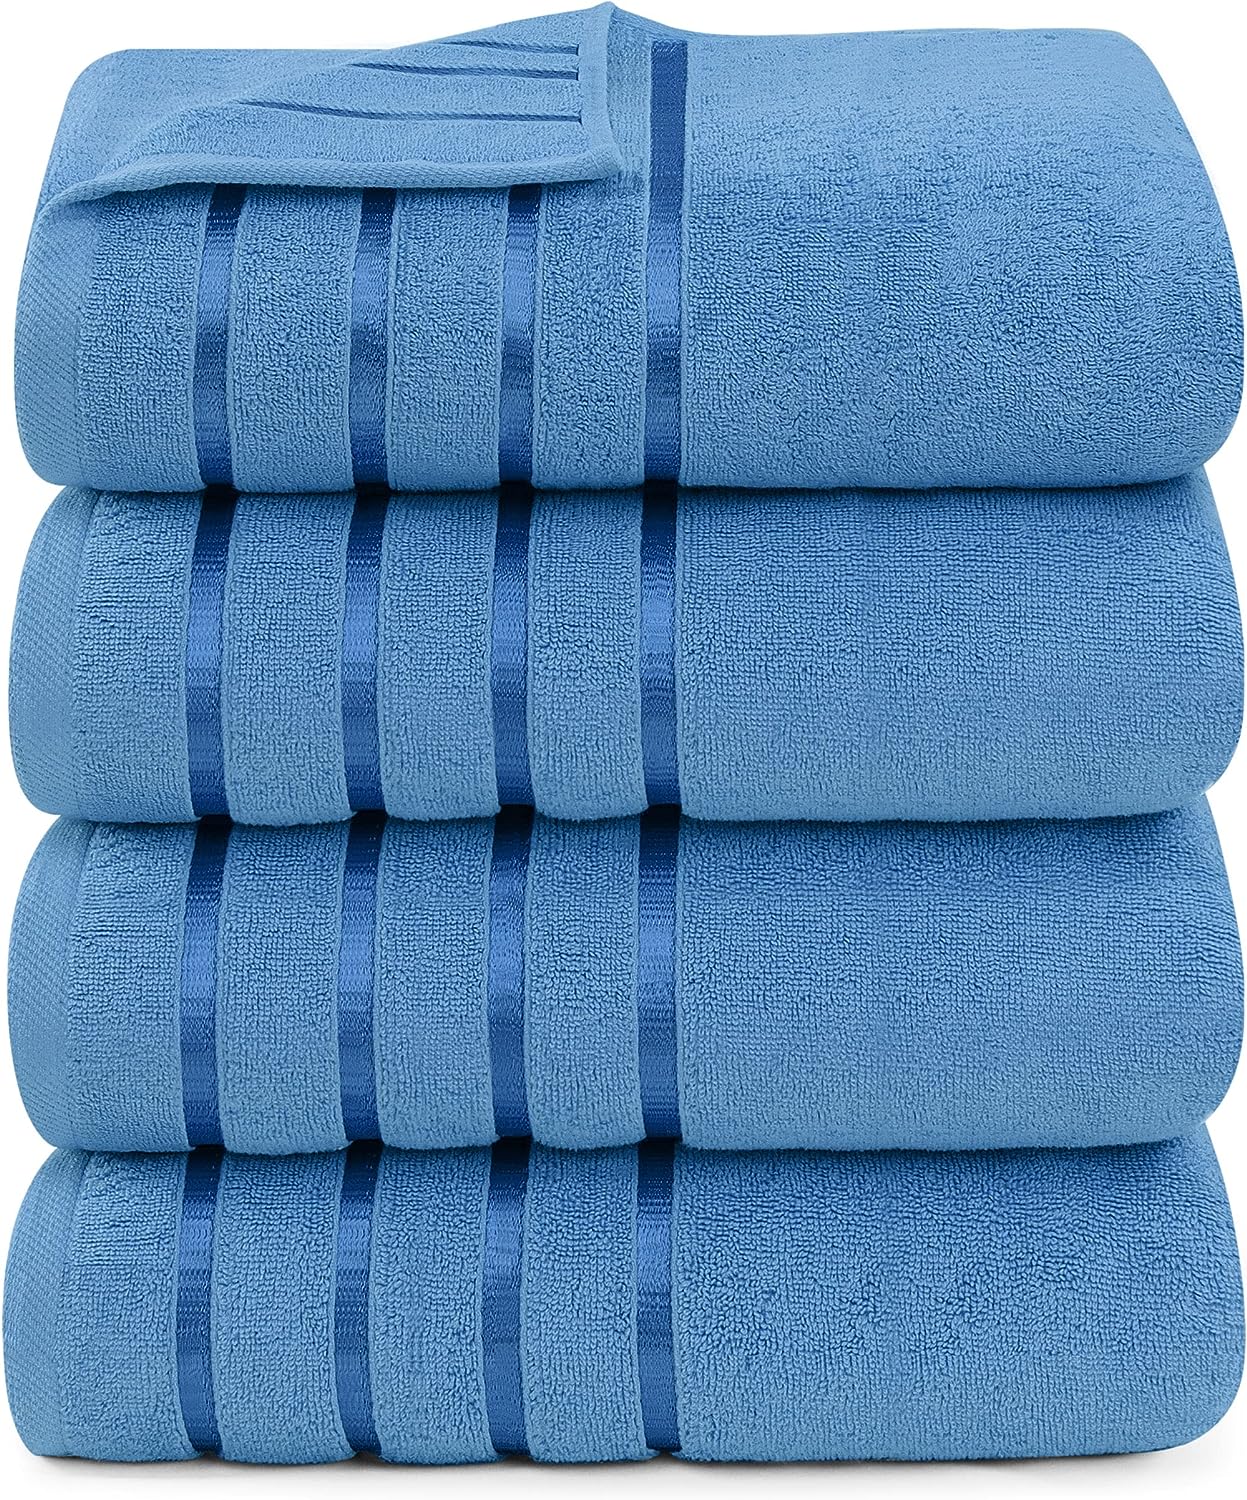 Utopia Towels 4 Pack Premium Bath Towels Set, (27 x 54 Inches) 100% Ring  Spun Cotton 600GSM, Lightweight and Highly Absorbent Qu